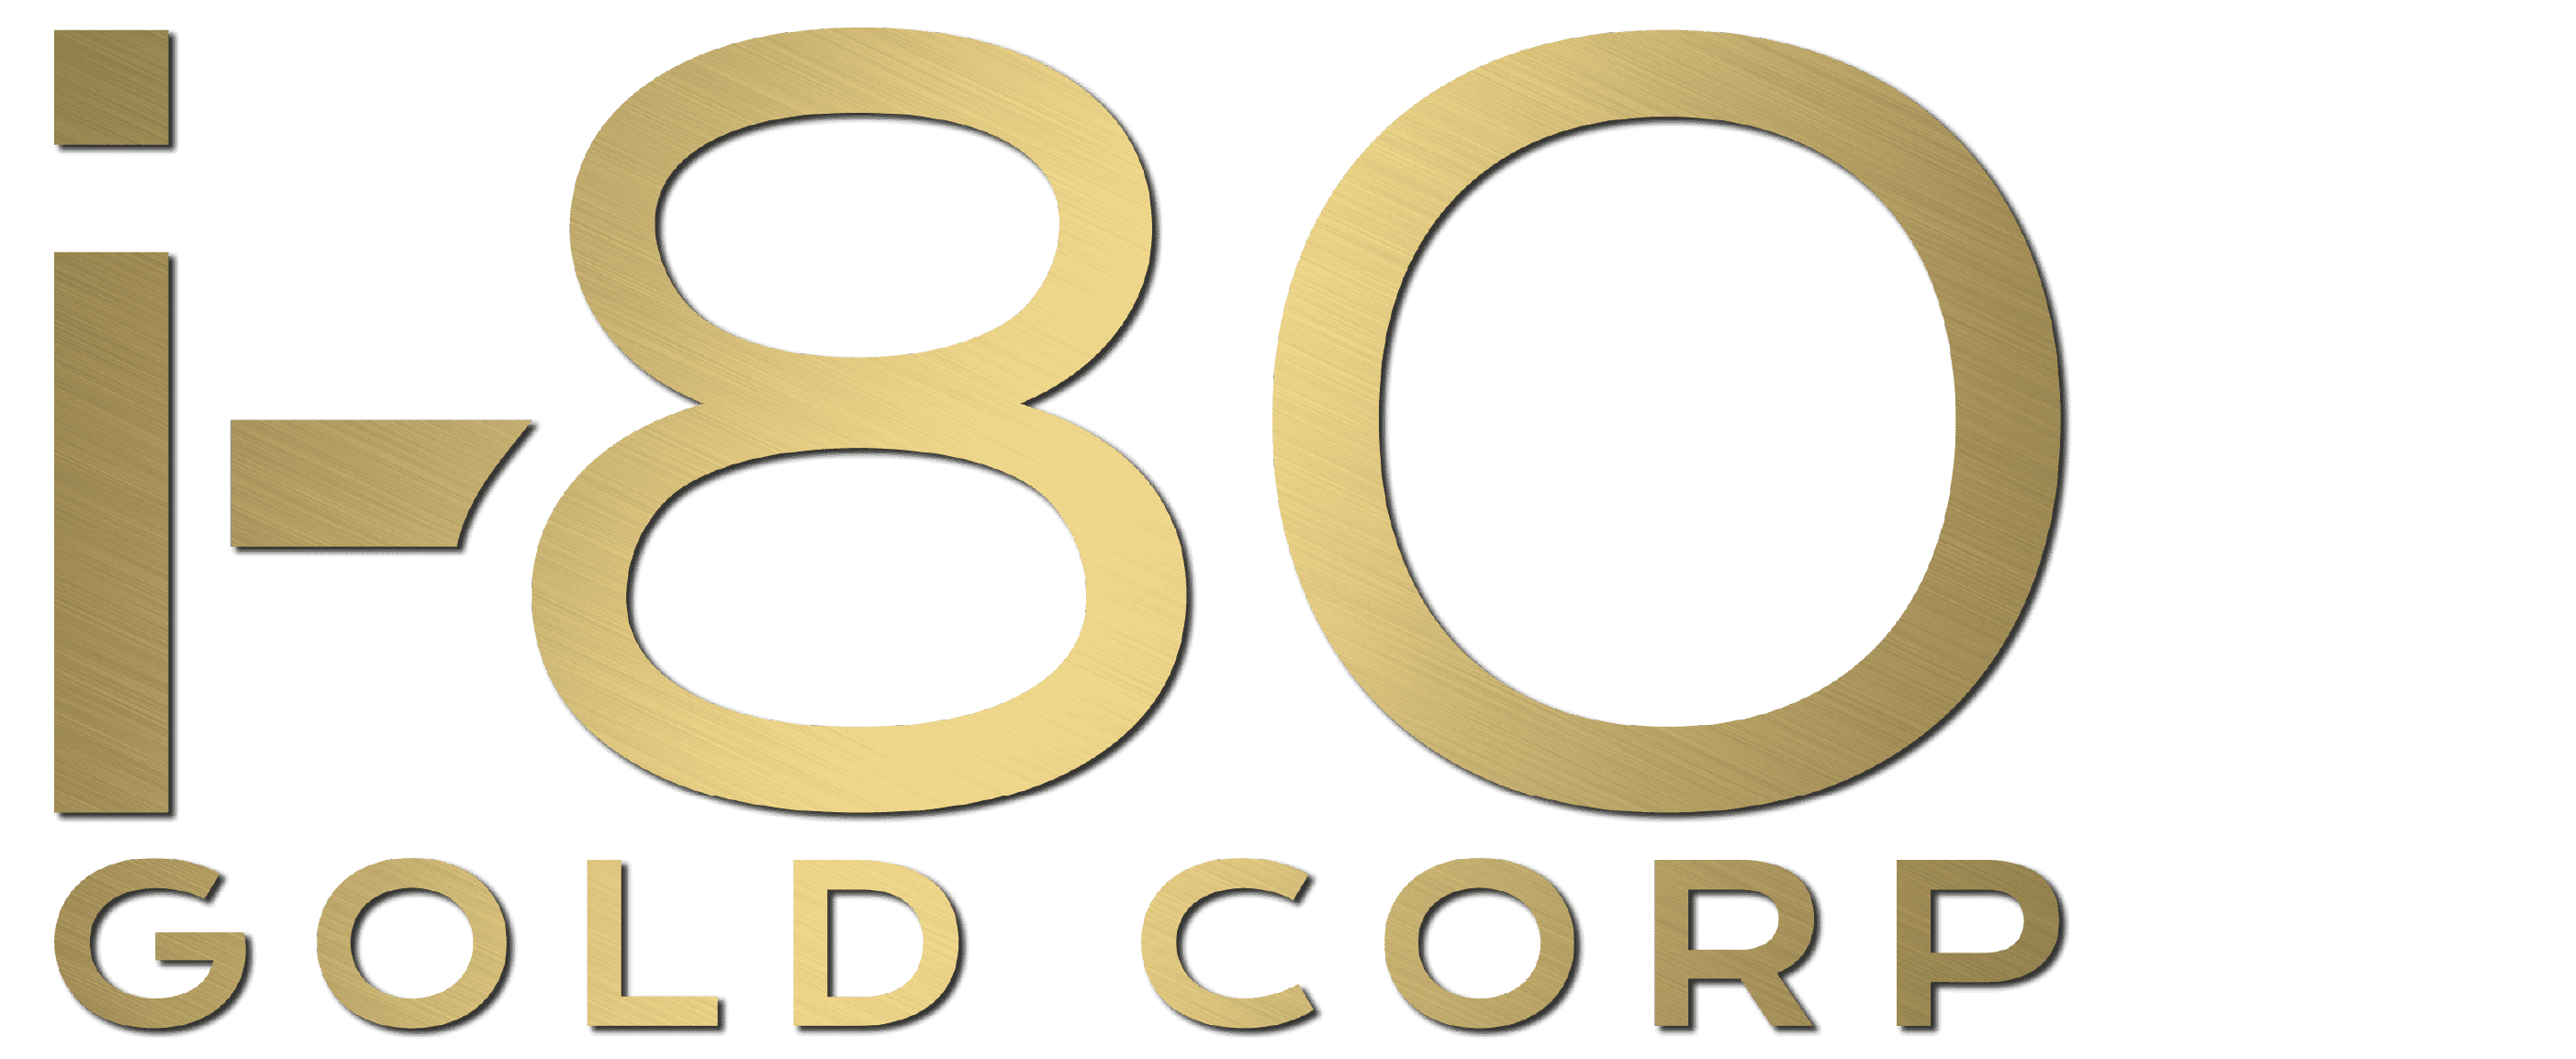 i-80 Gold Corp.